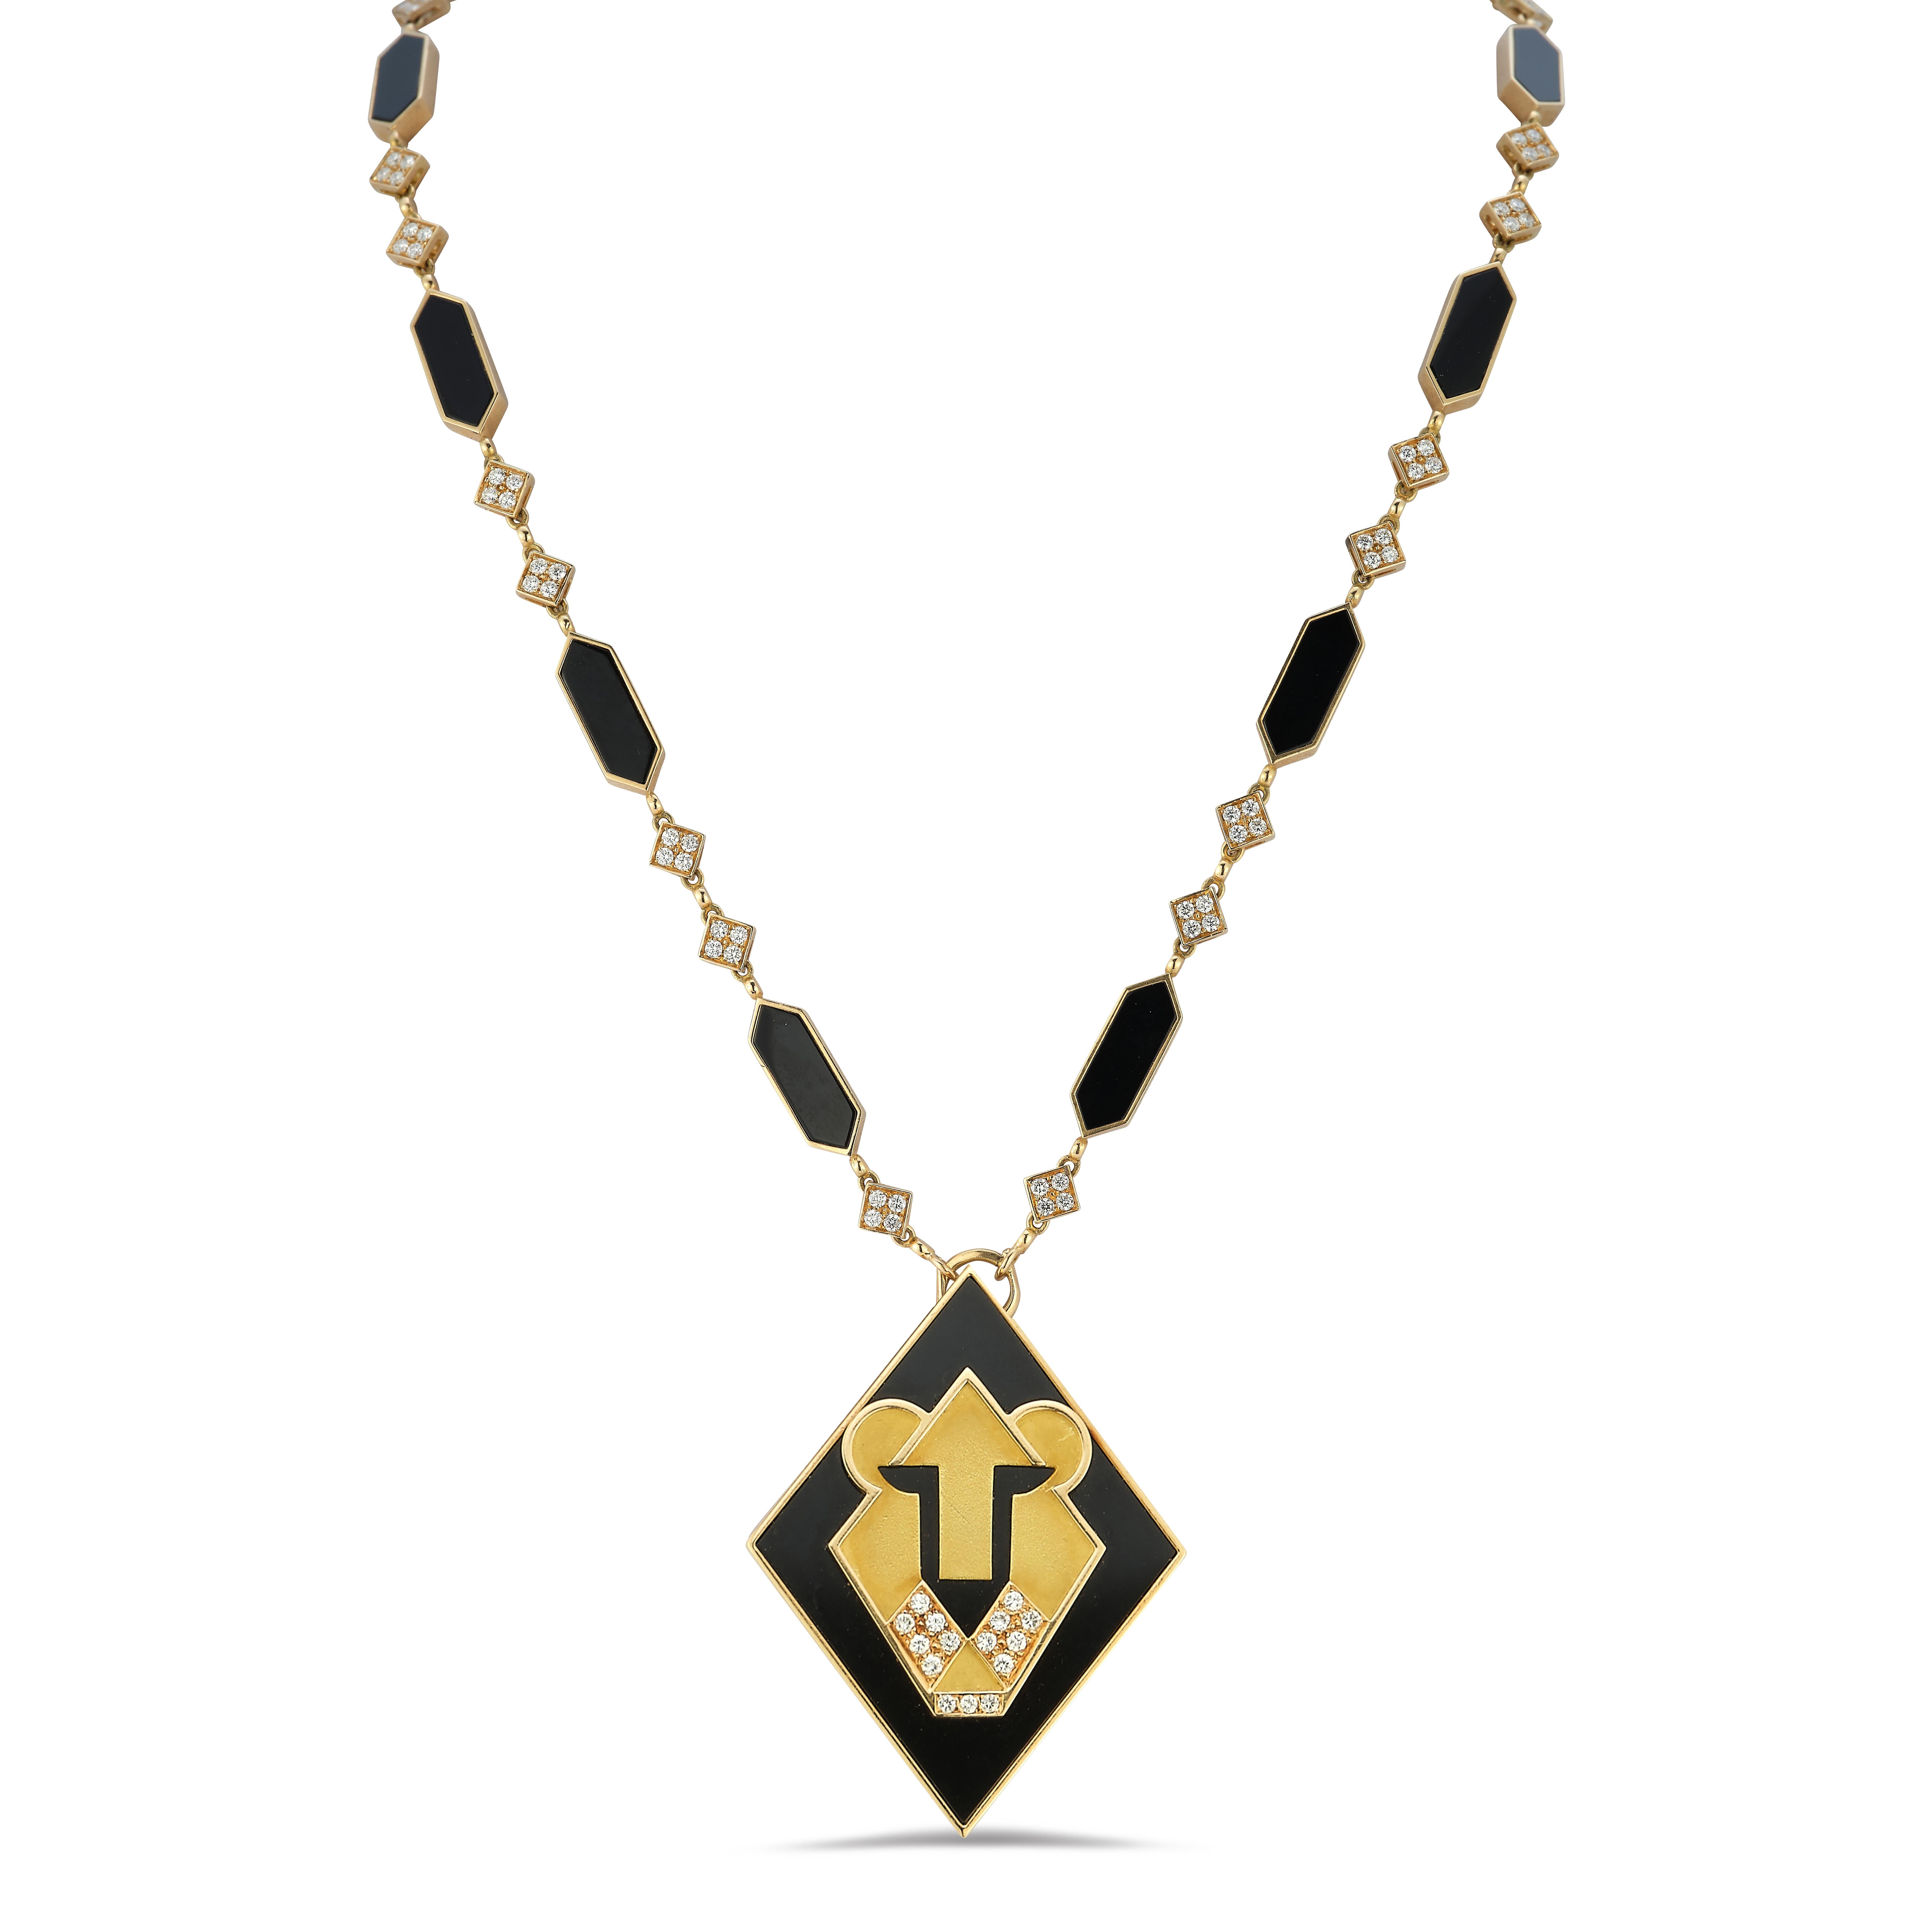 Bvlgari Onyx & Diamond Lion Necklace In Excellent Condition For Sale In New York, NY